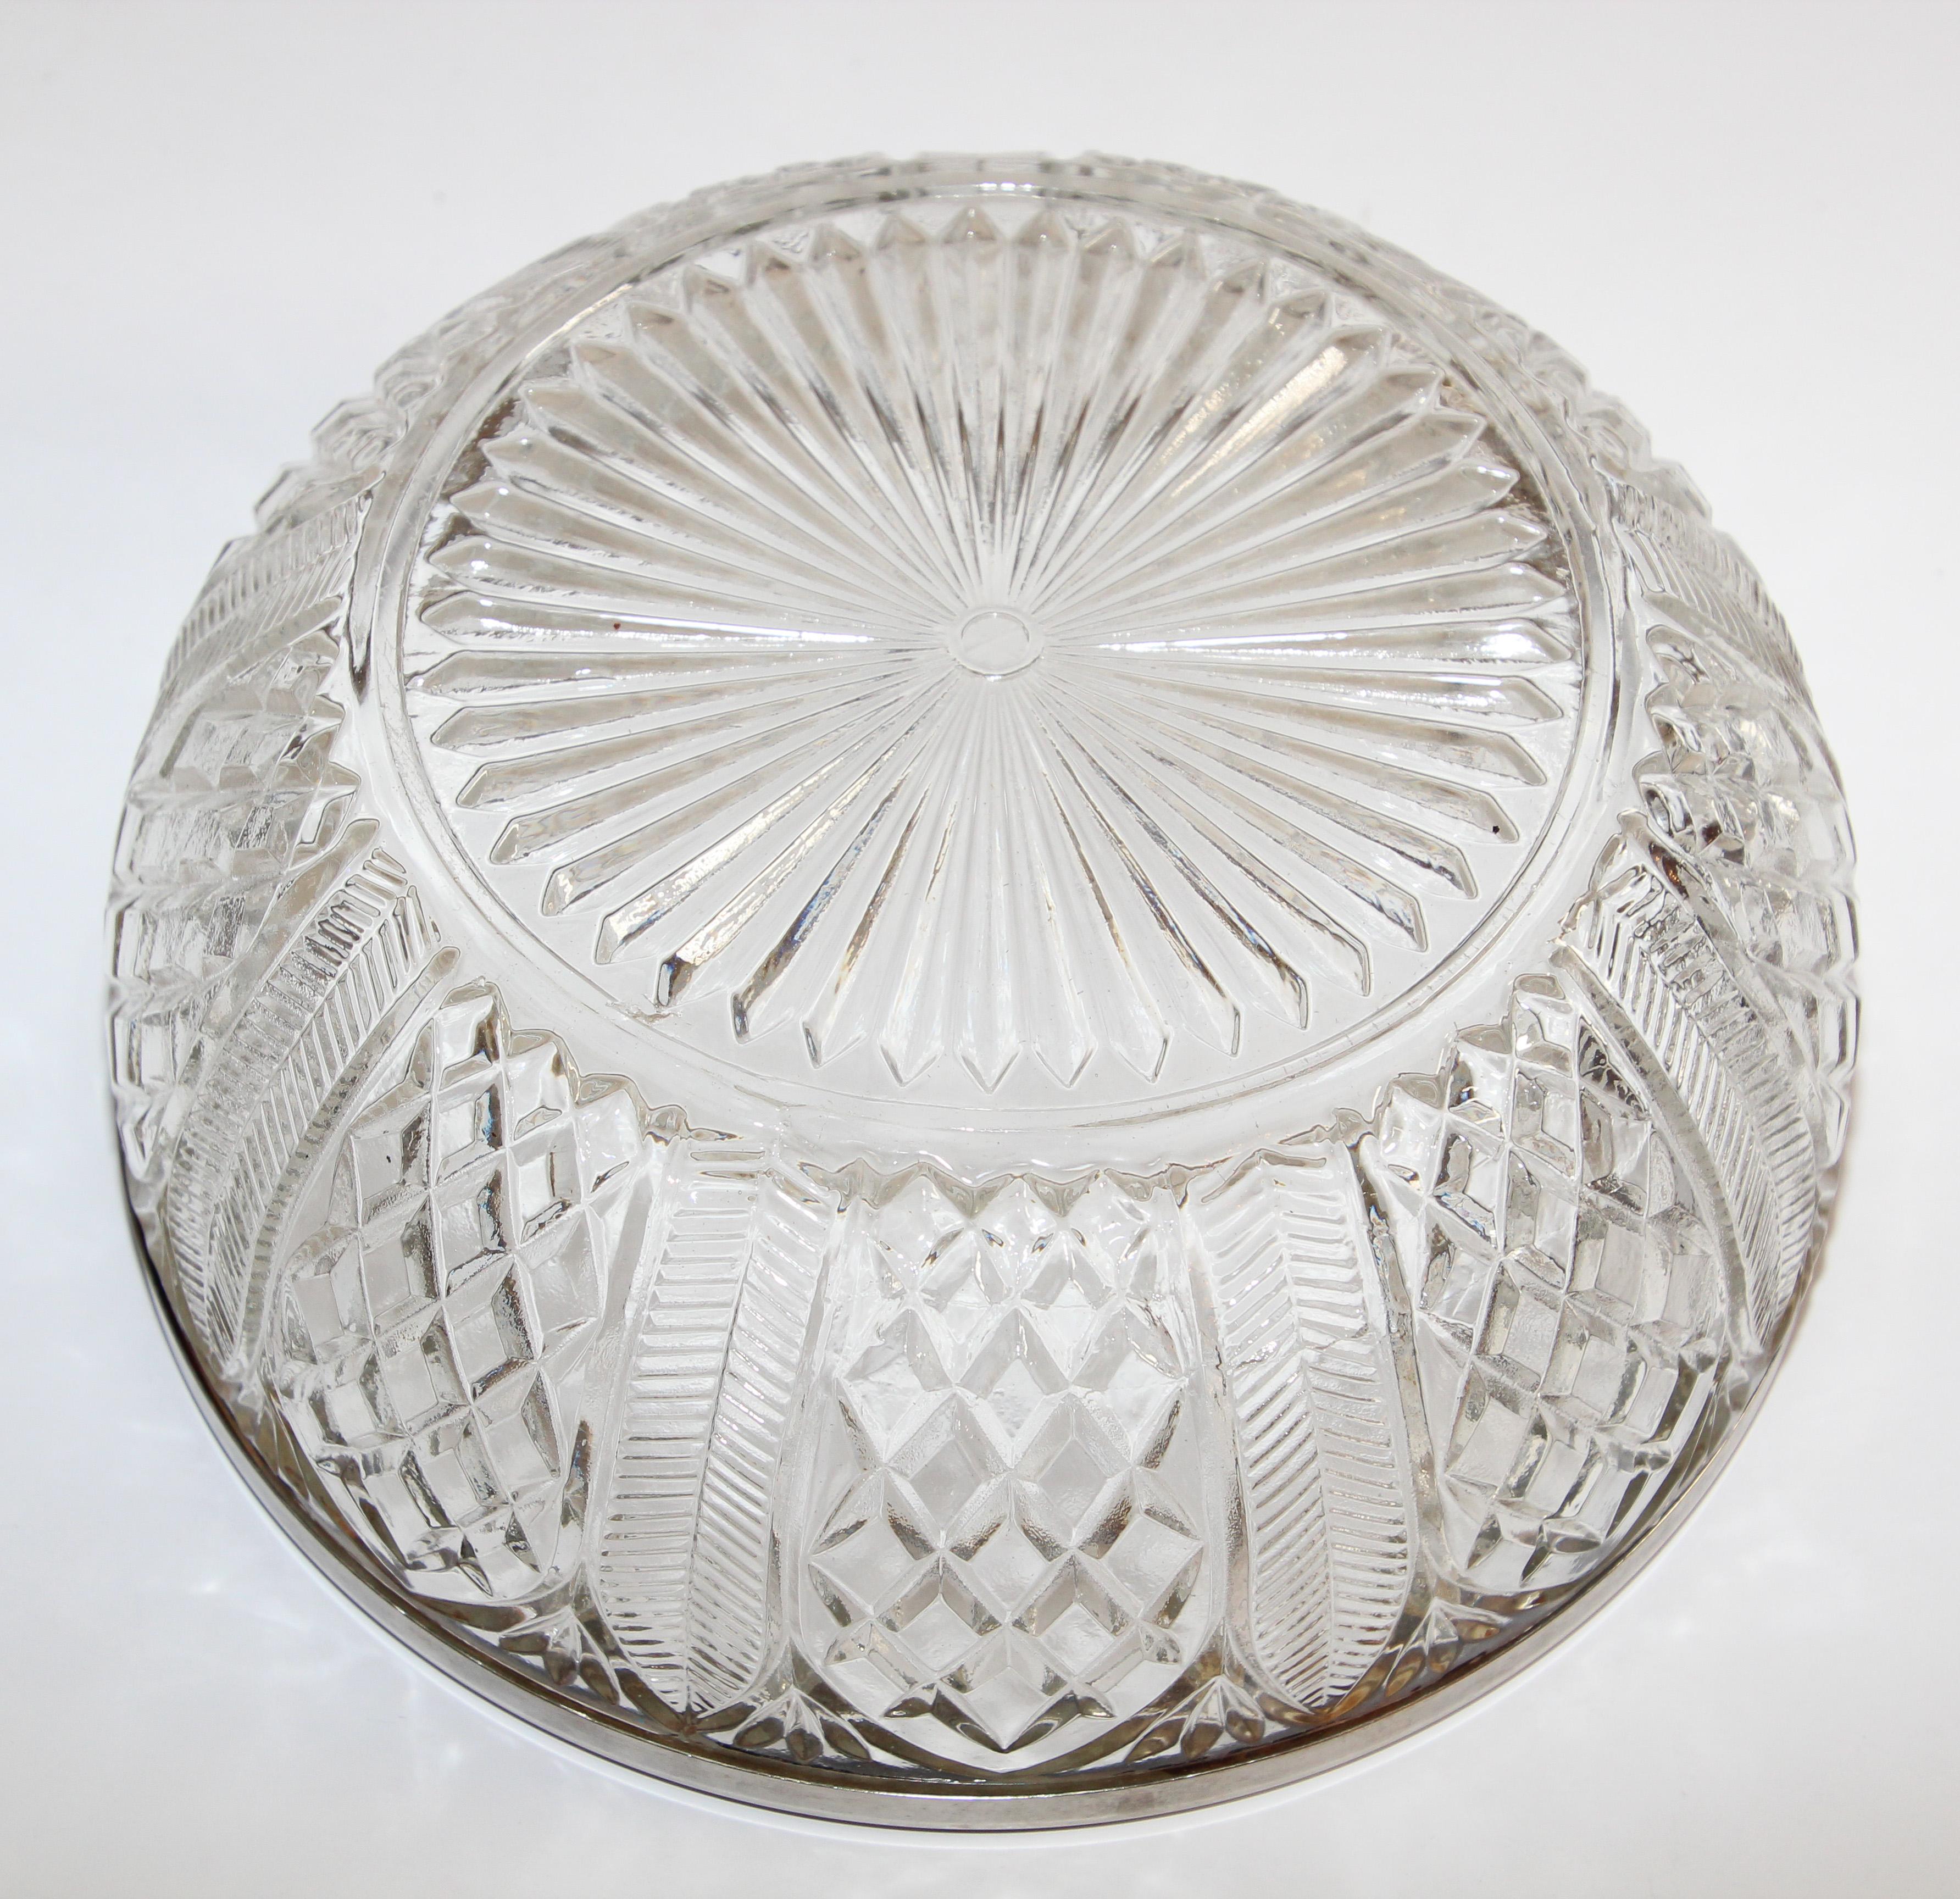 Hand-Crafted Vintage Large Crystal Bowl with Silver Plated Rim